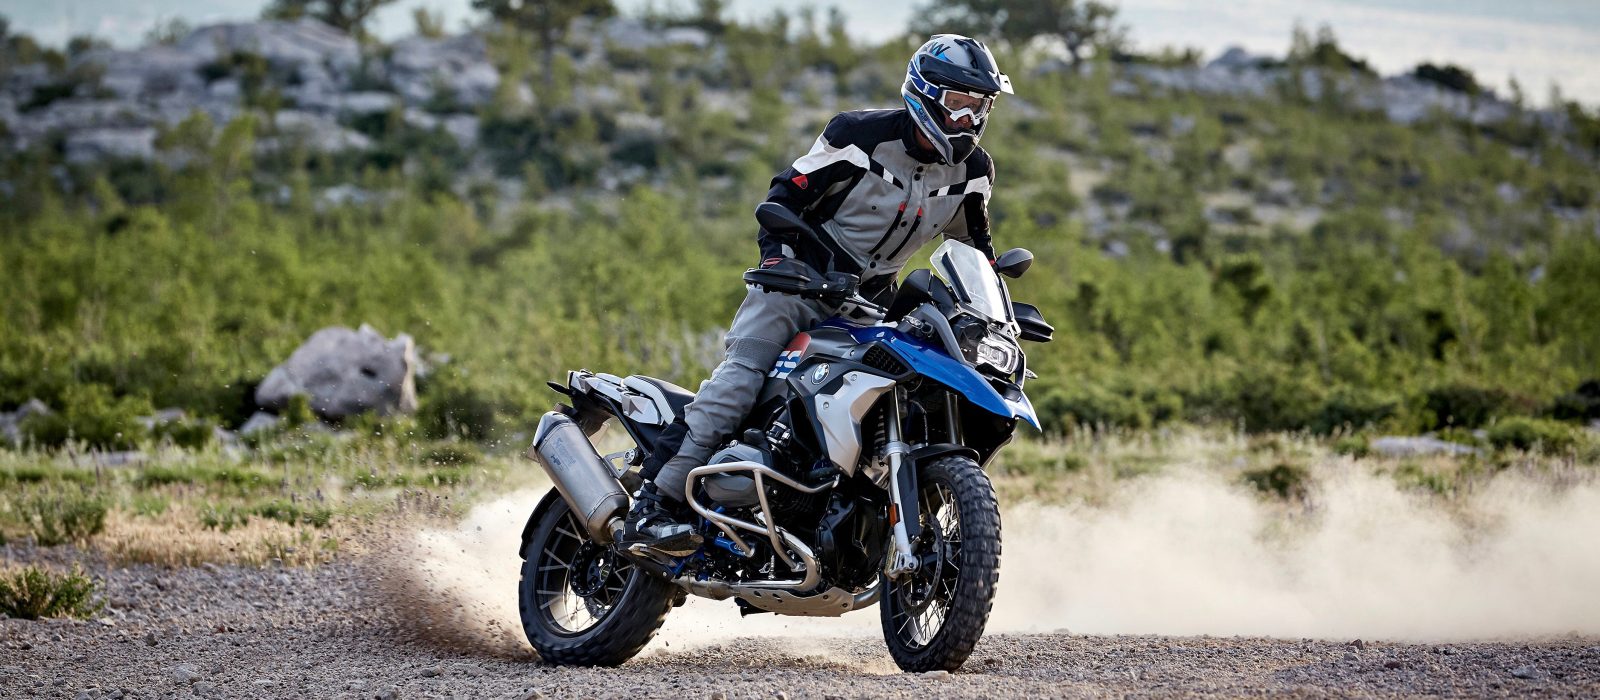 The most off-road ready BMW R 1200 GS ever - Australasian Dirt Bike